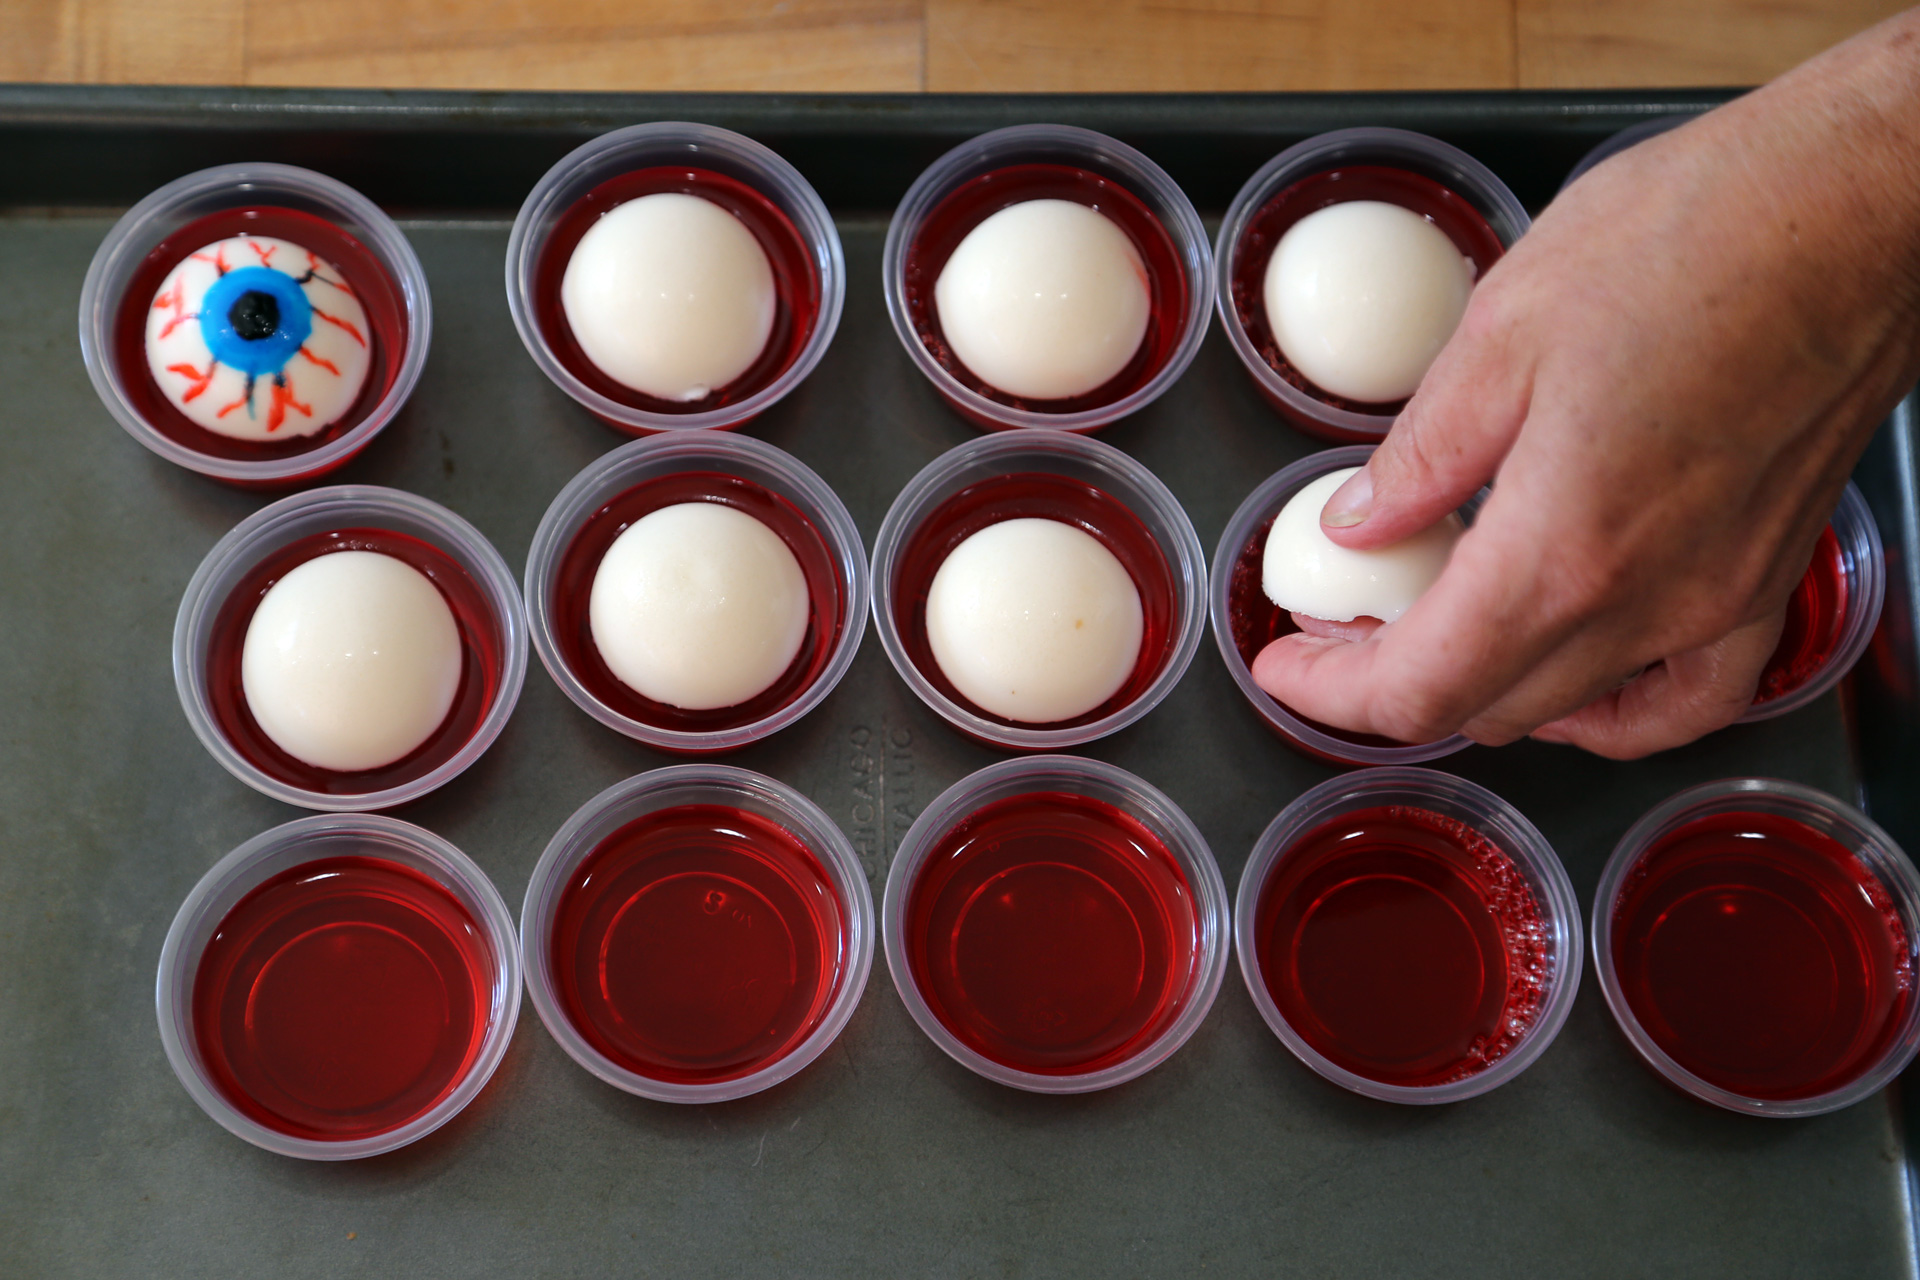 To finish, top each cup of red gelatin with an eyeball.